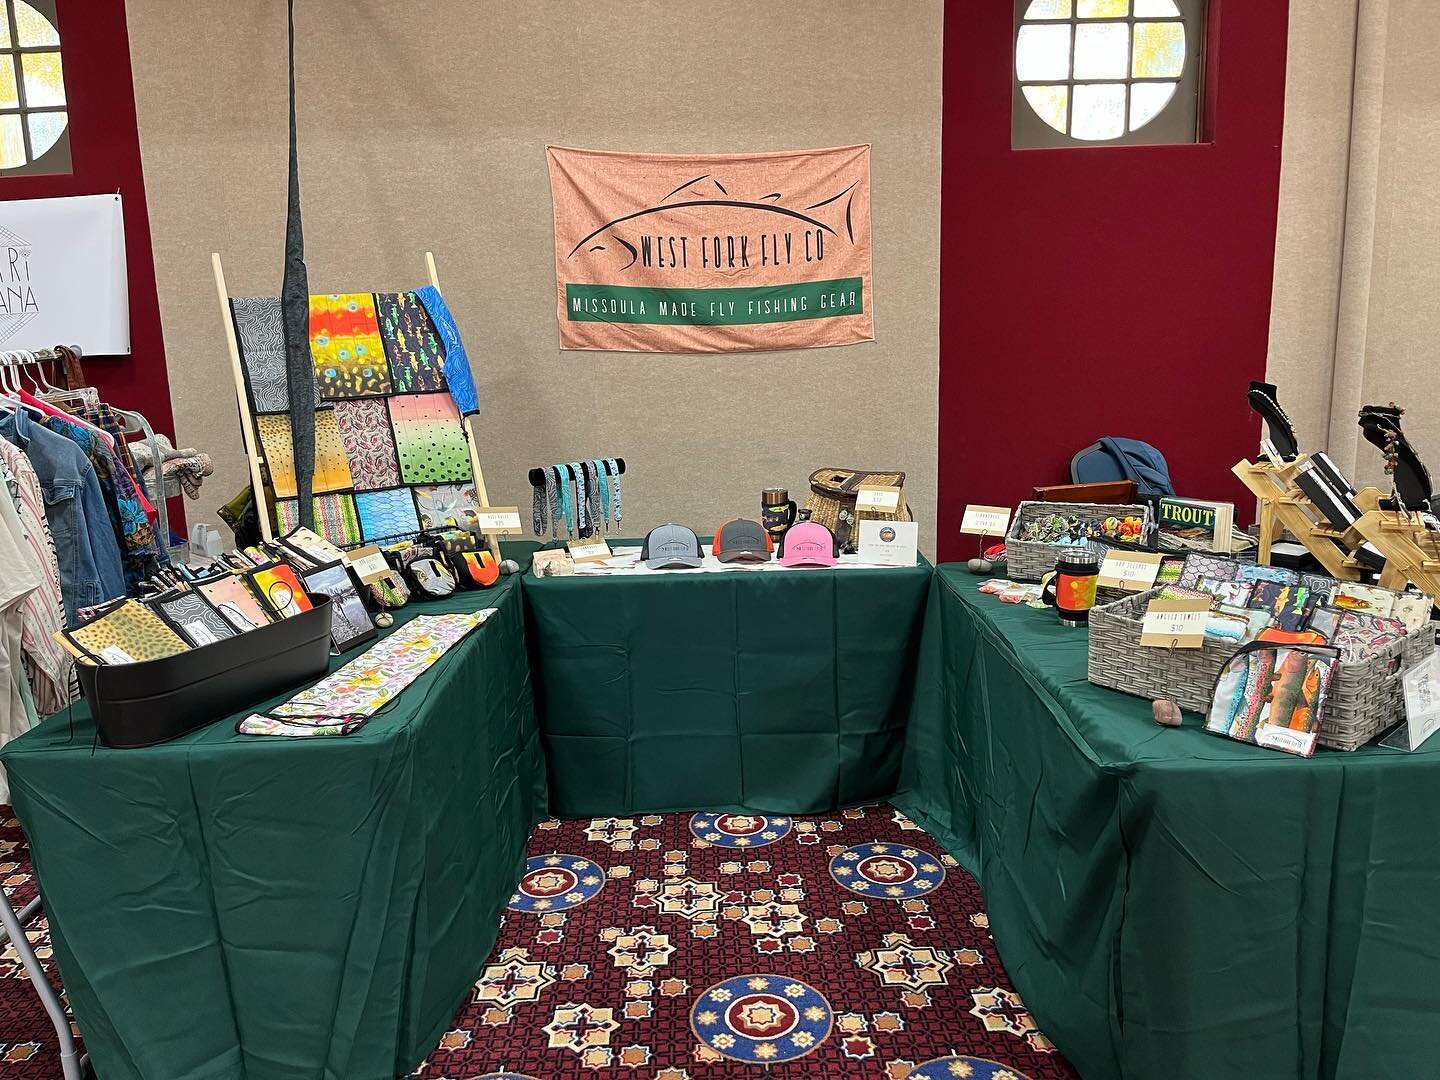 I&rsquo;m selling in #helenamontana today at the Big Sky art show, upstairs in the mezzanine.